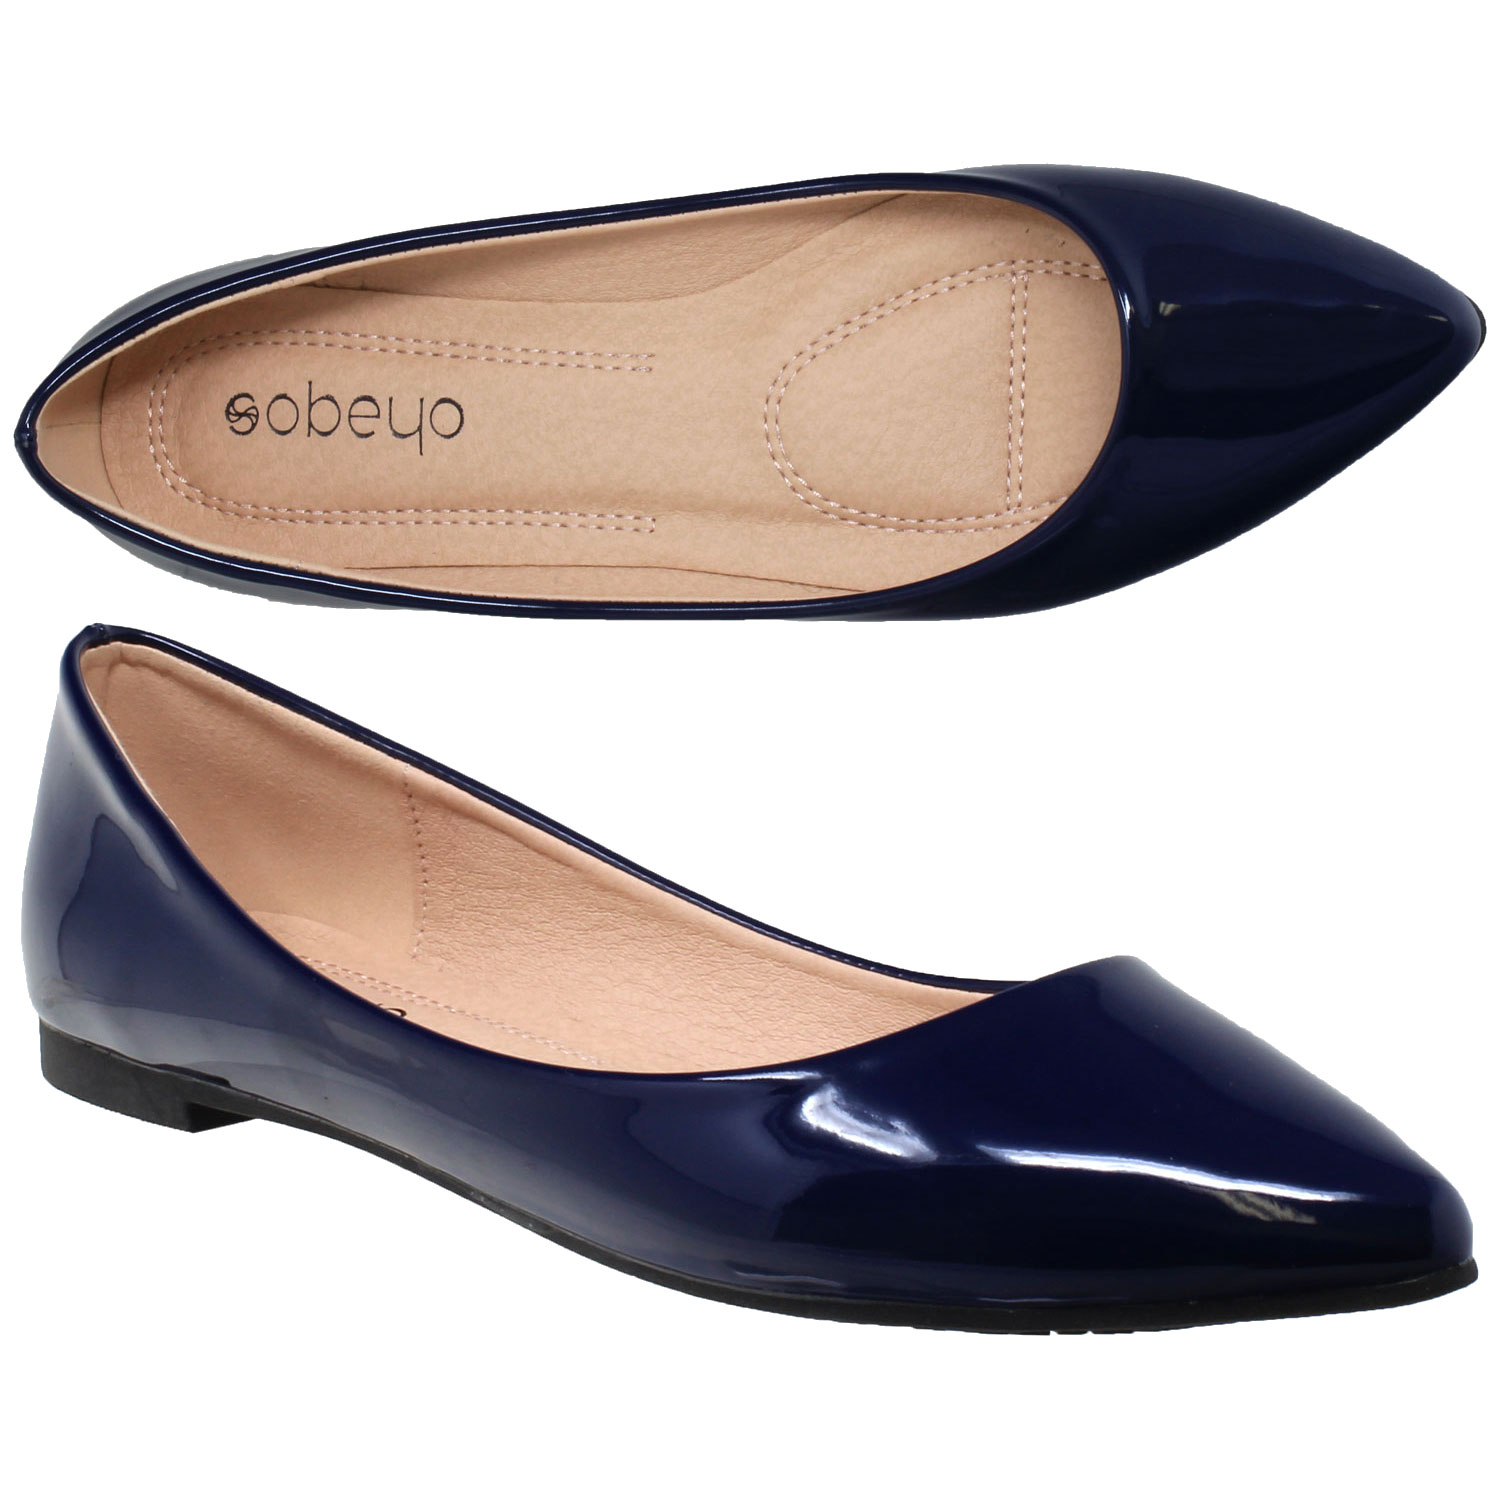 SOBEYO - Sobeyo Womens Ballet Flats Patent Leather Pointed Toe Slip On ...